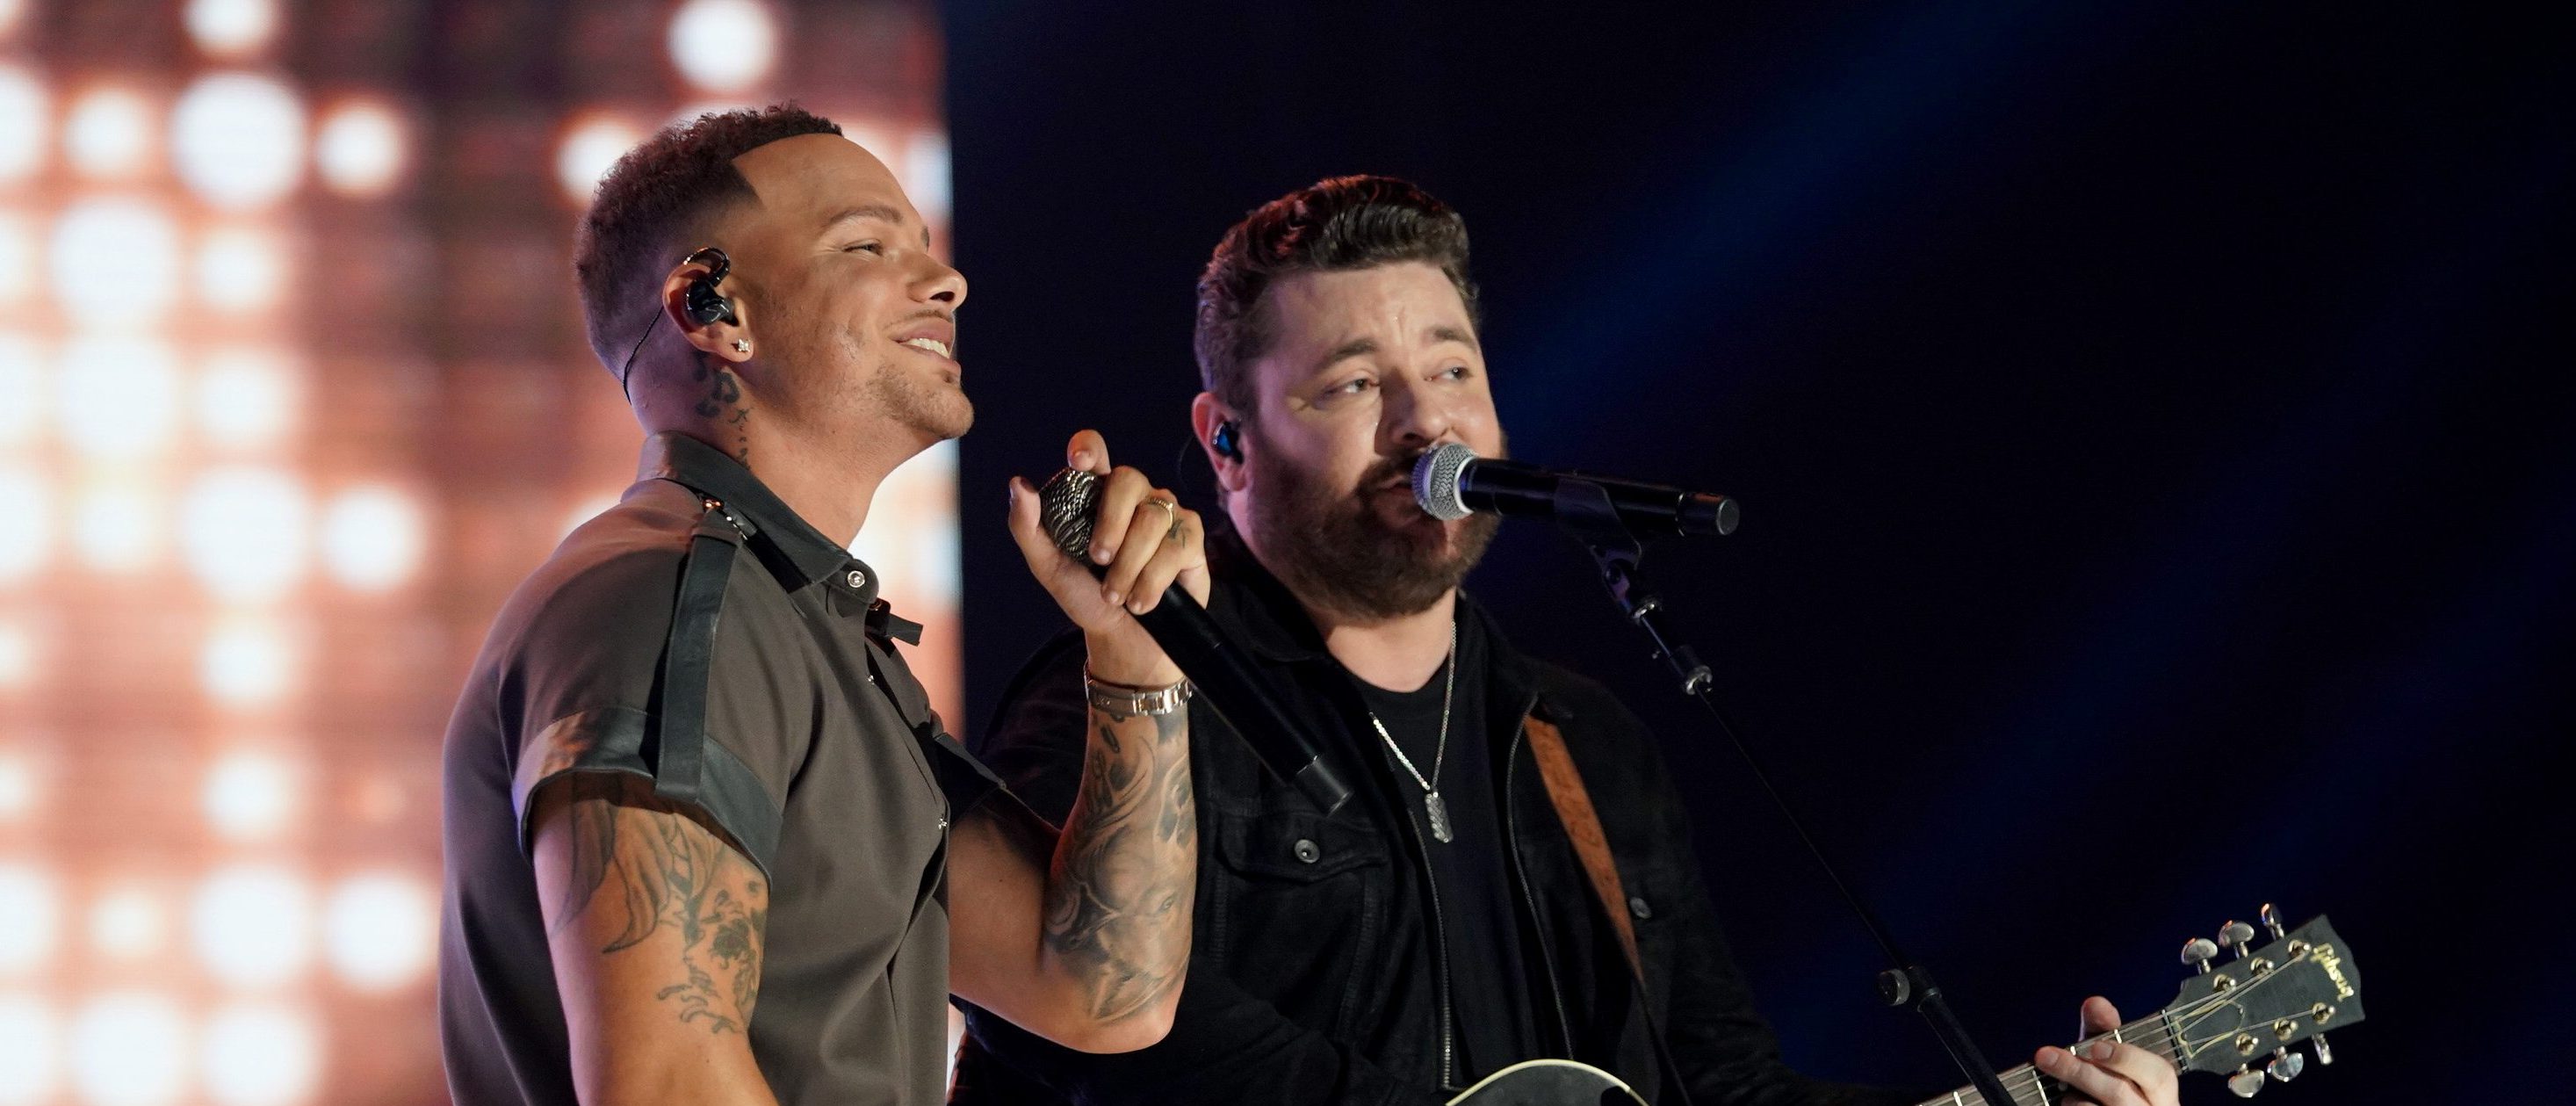 Chris Young & Kane Brown Bring the House Down with “Famous Friends” Performance